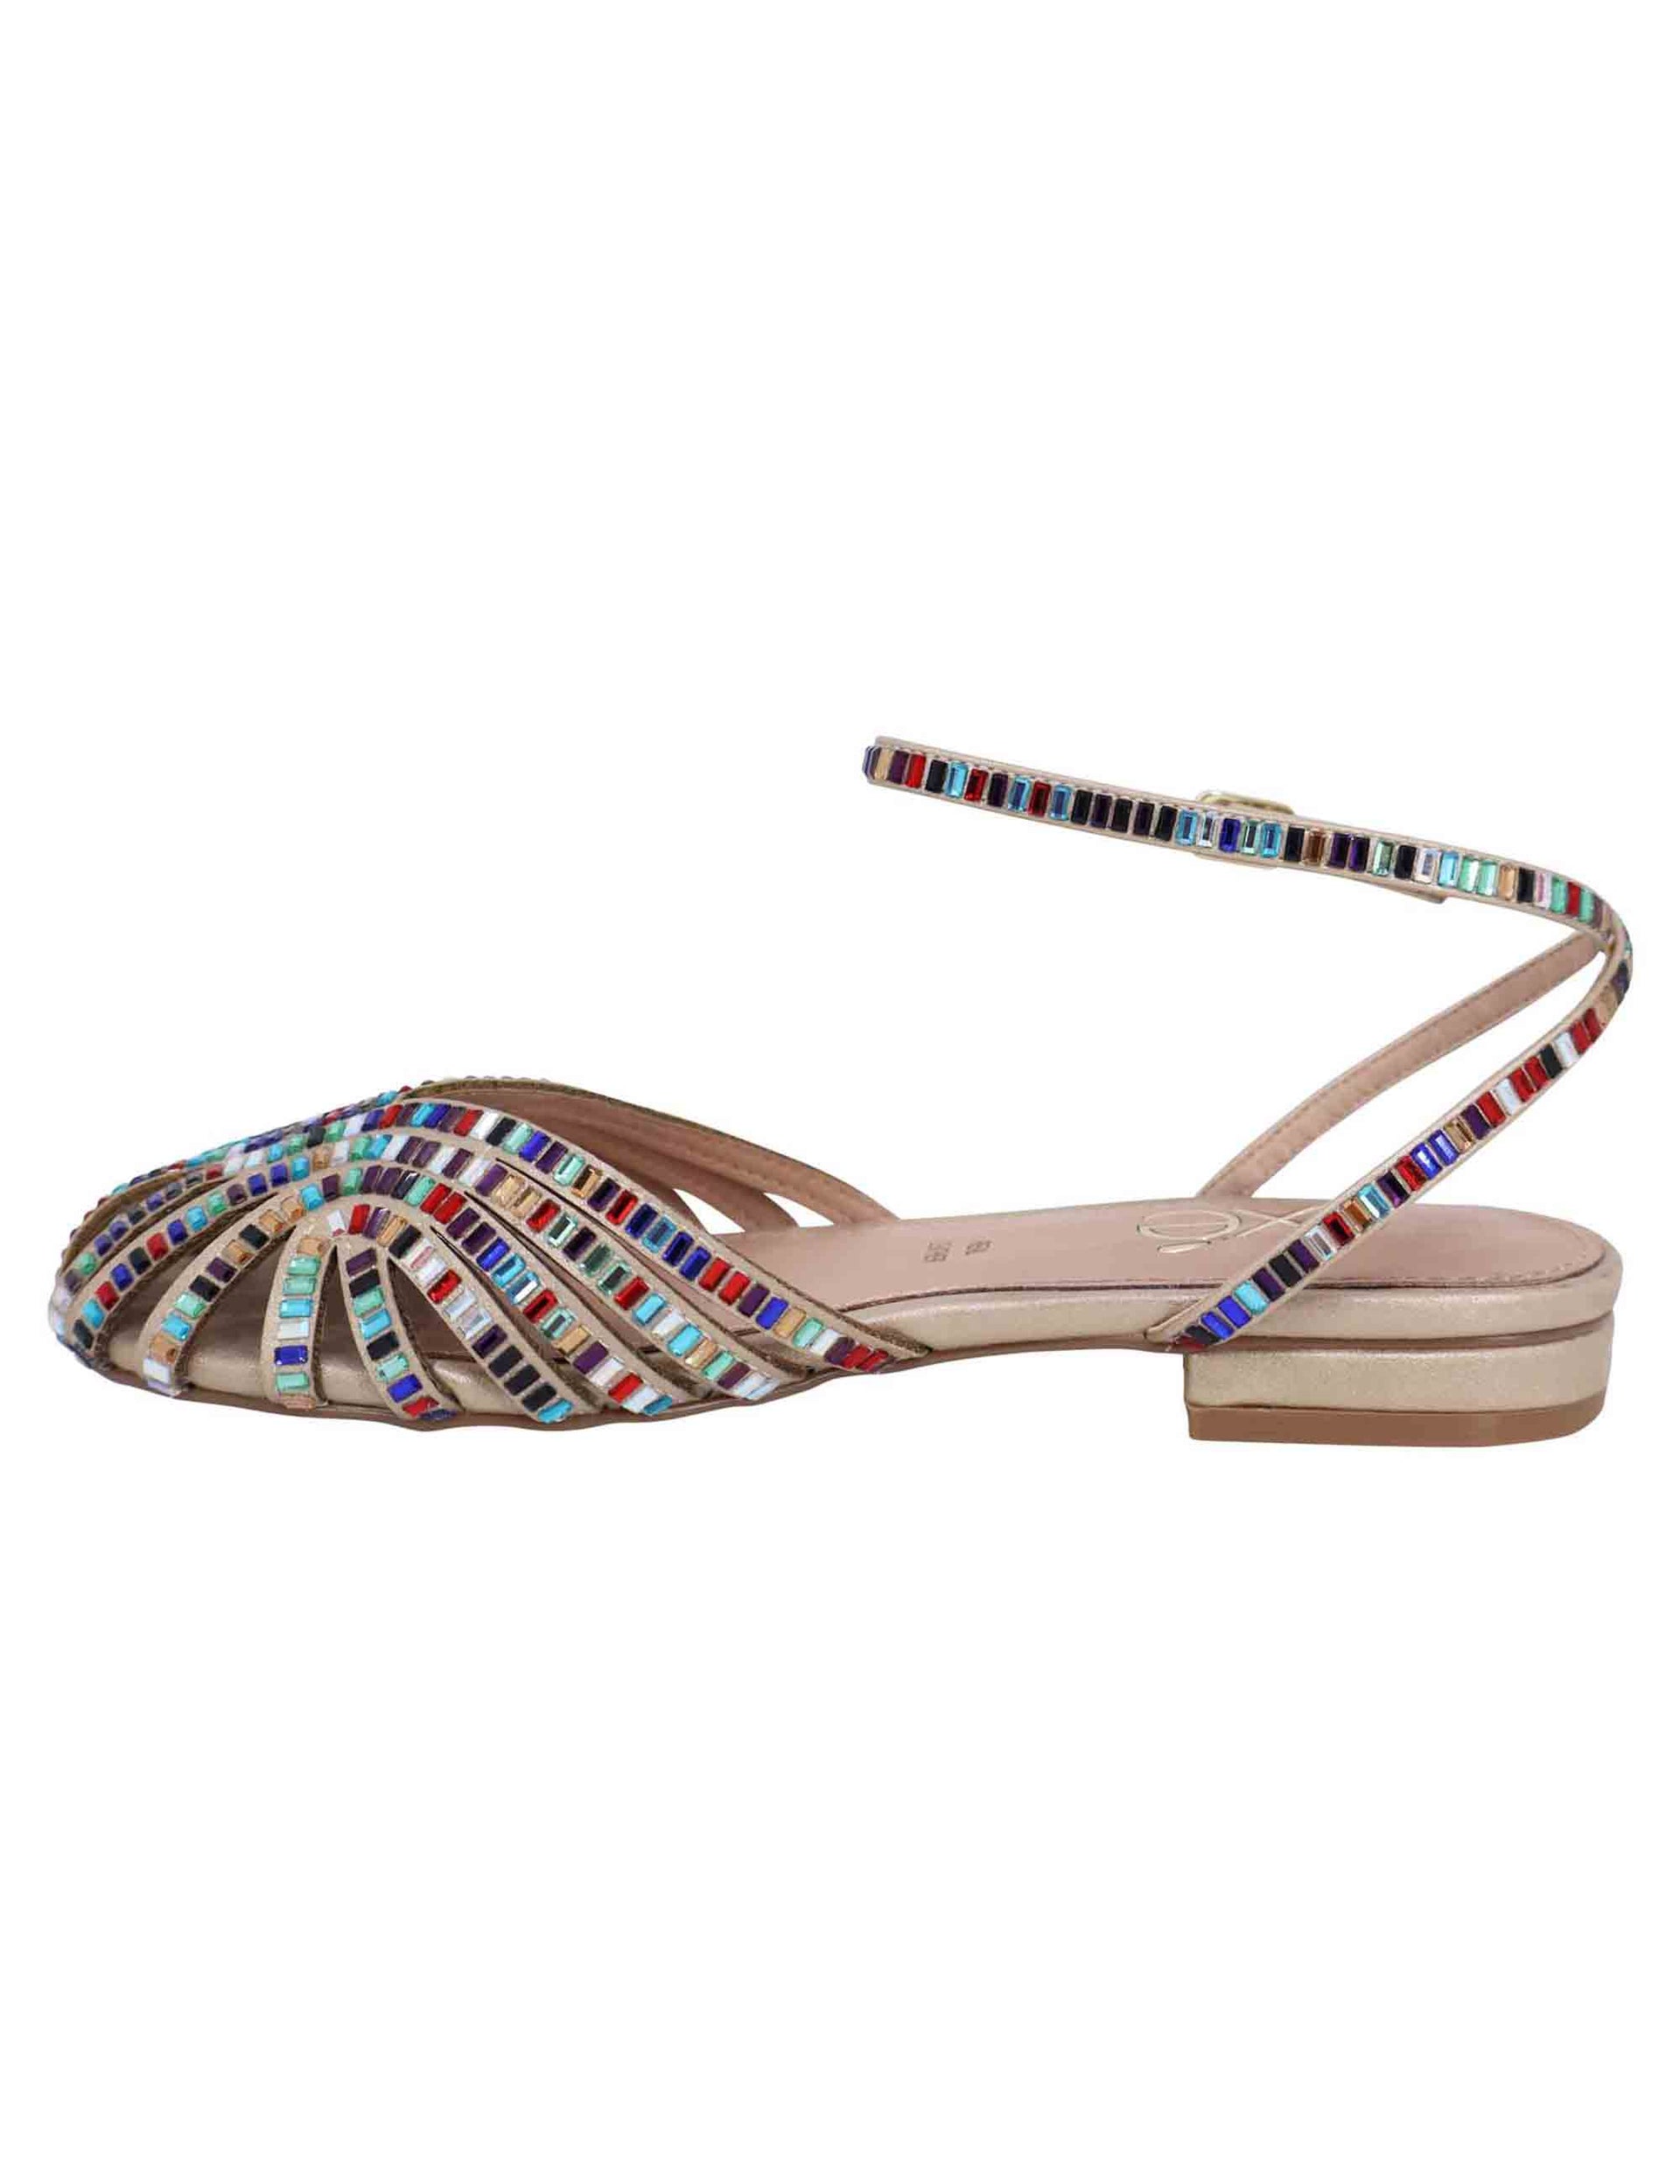 Women's flat sandals in gold fabric with multicolored stones and ankle strap